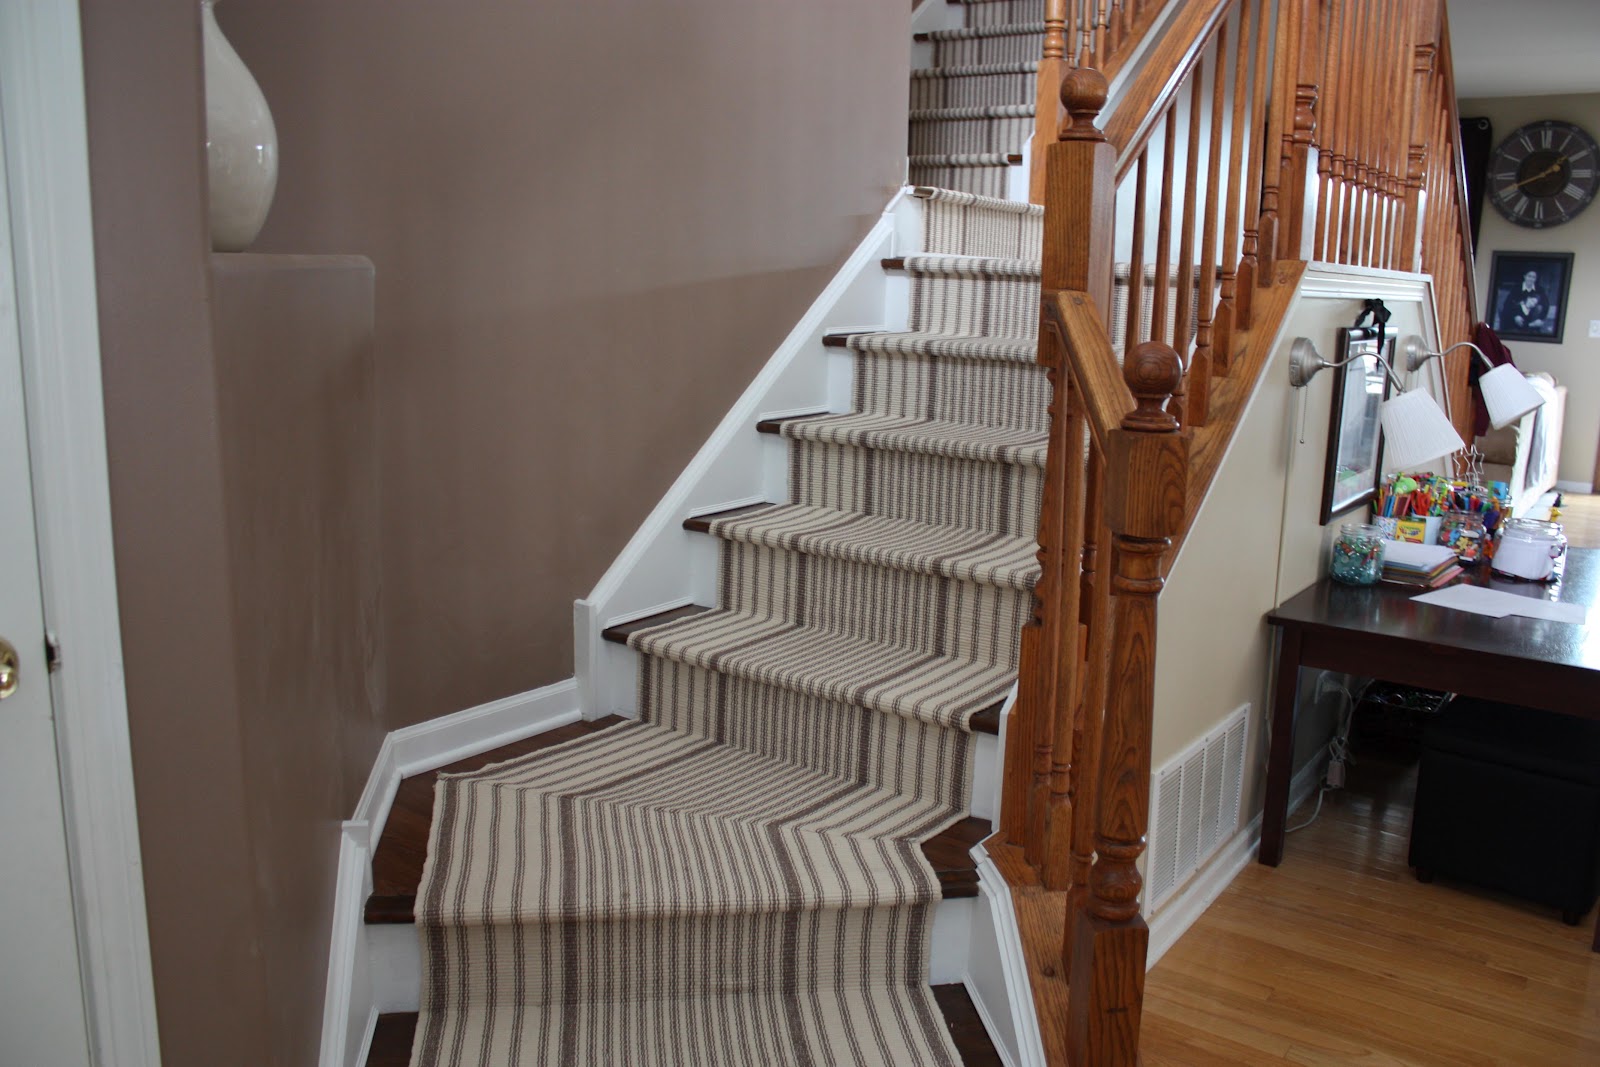 Give Your Place A Makeover By Laying Stair Runners